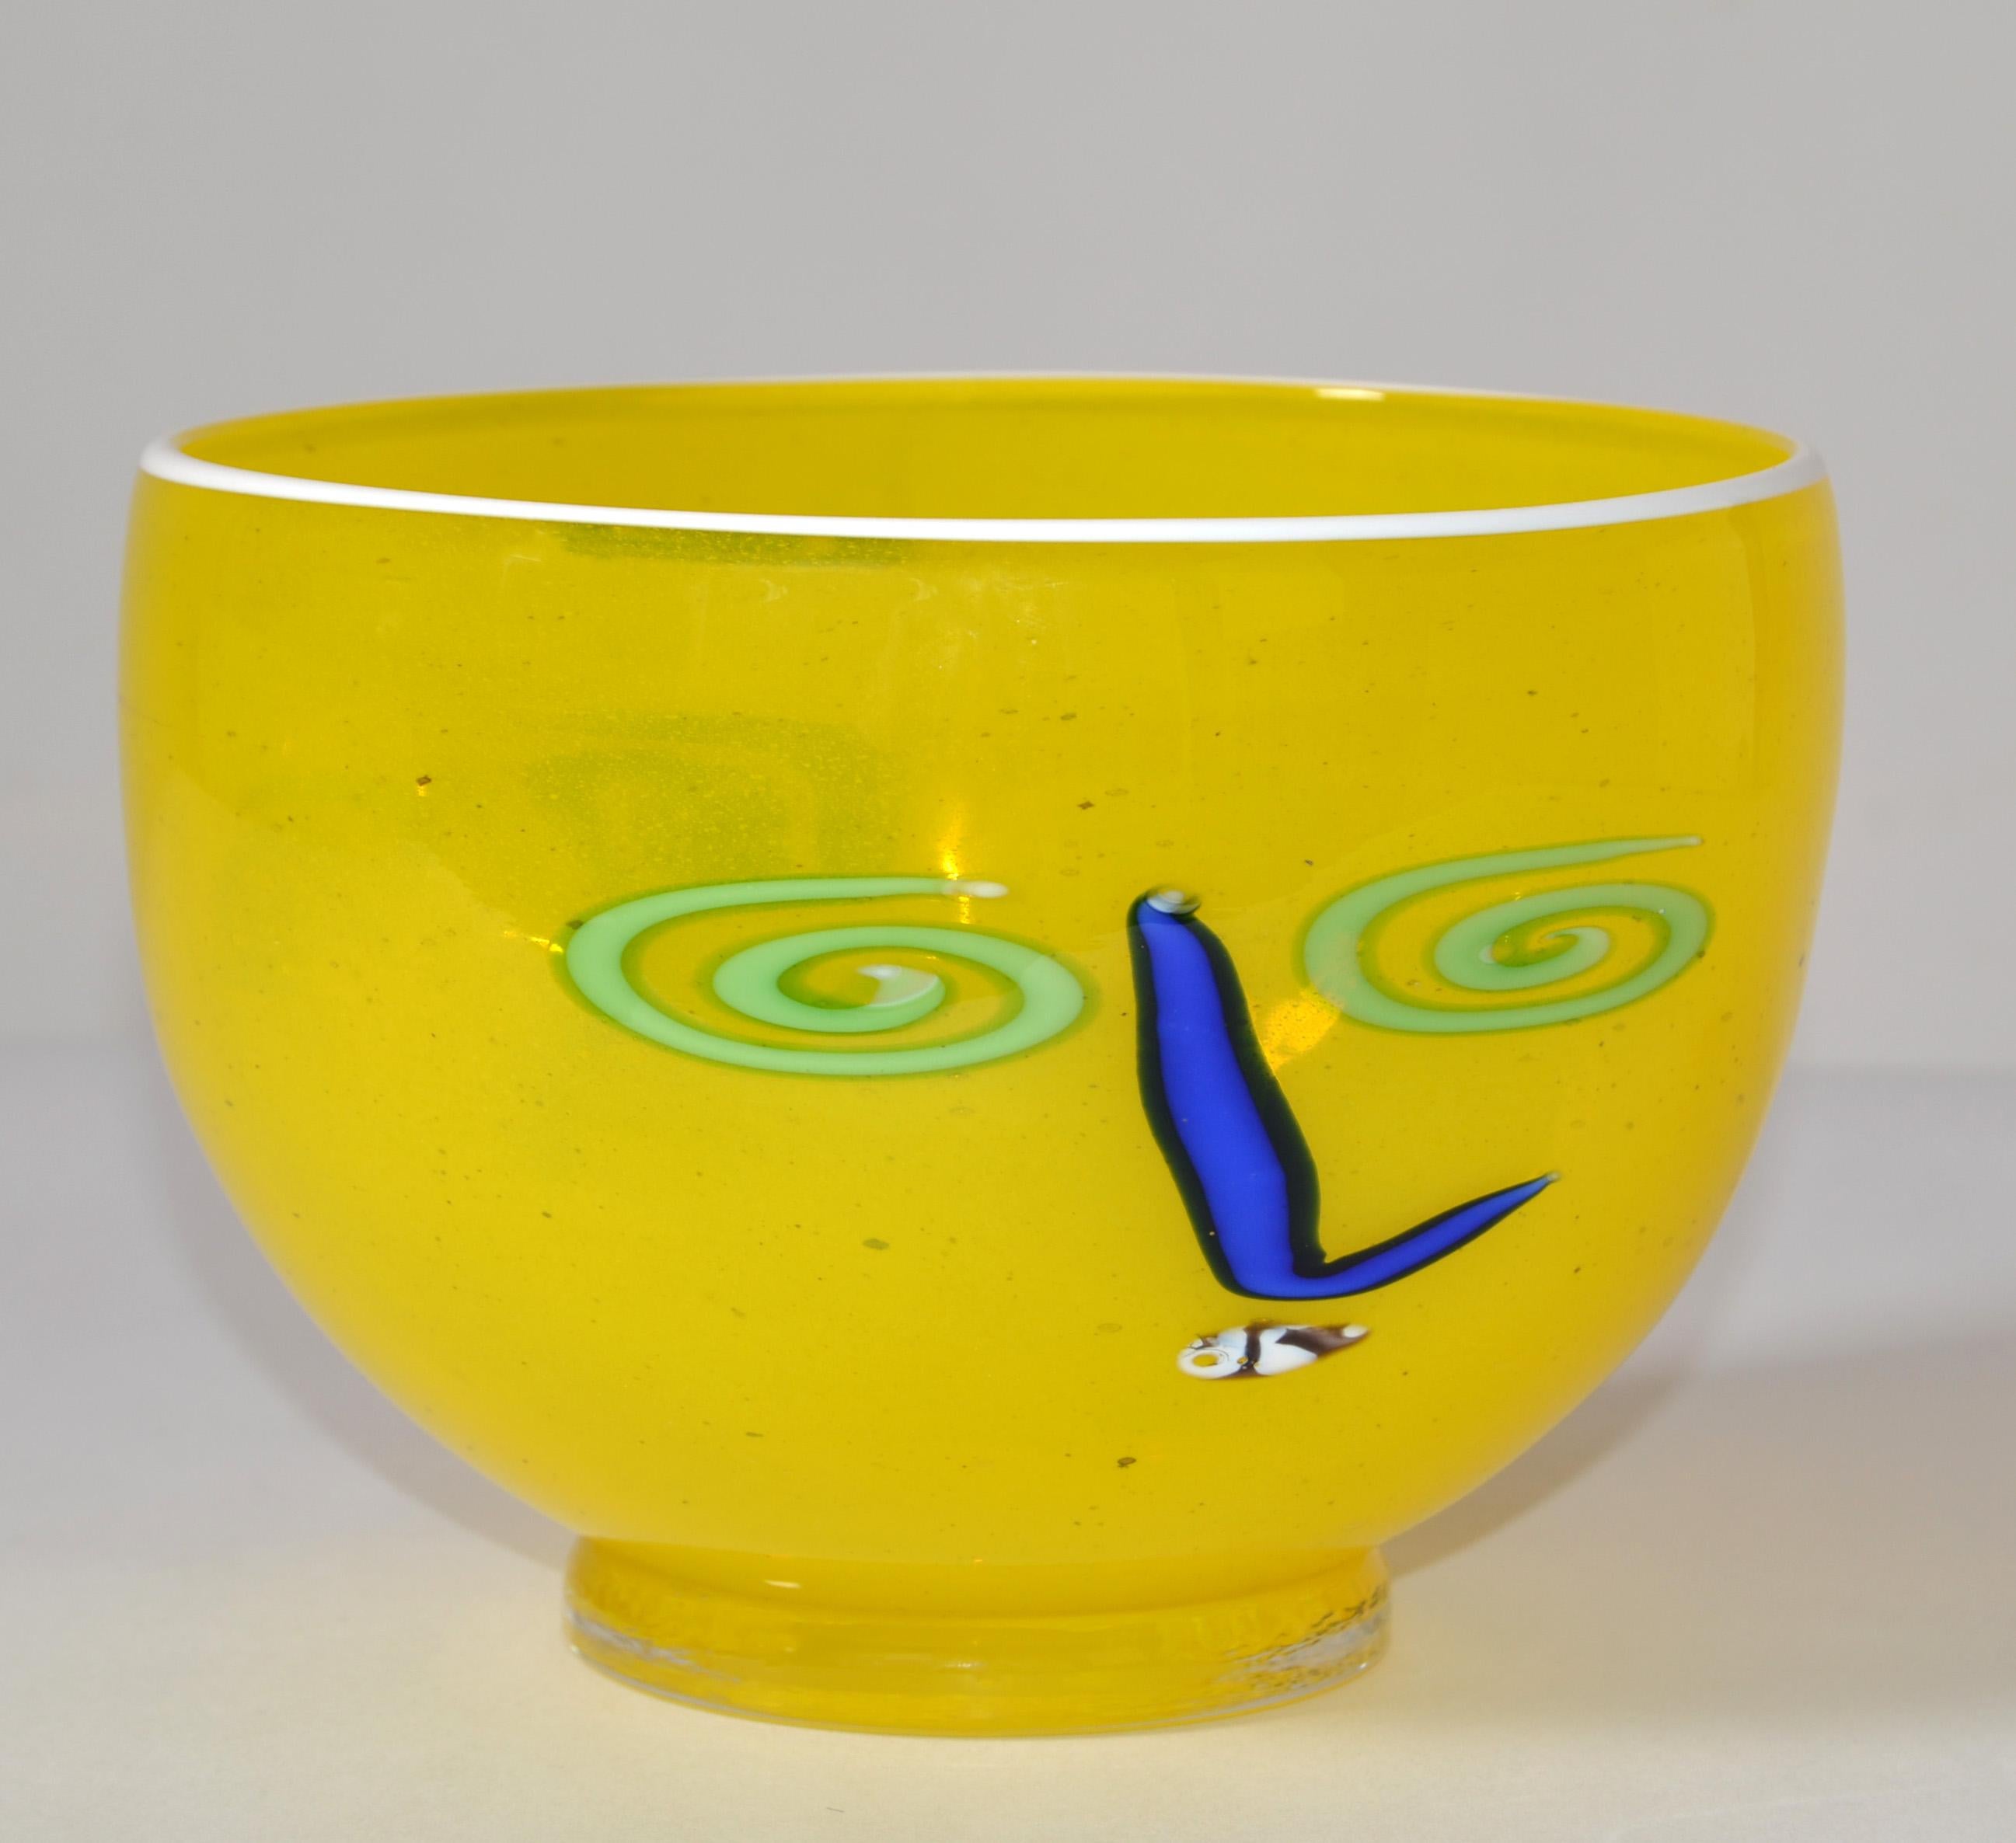 Mid-Century Modern Op Art Glass Bowl styled after Picasso by Artist Kerry Feldman for Fine line.
Canary Yellow Bowl depicting blue abstract eyes and a pink abstract Nose. The Top edge is in white milk glass decor.
Signature by the Artist at the